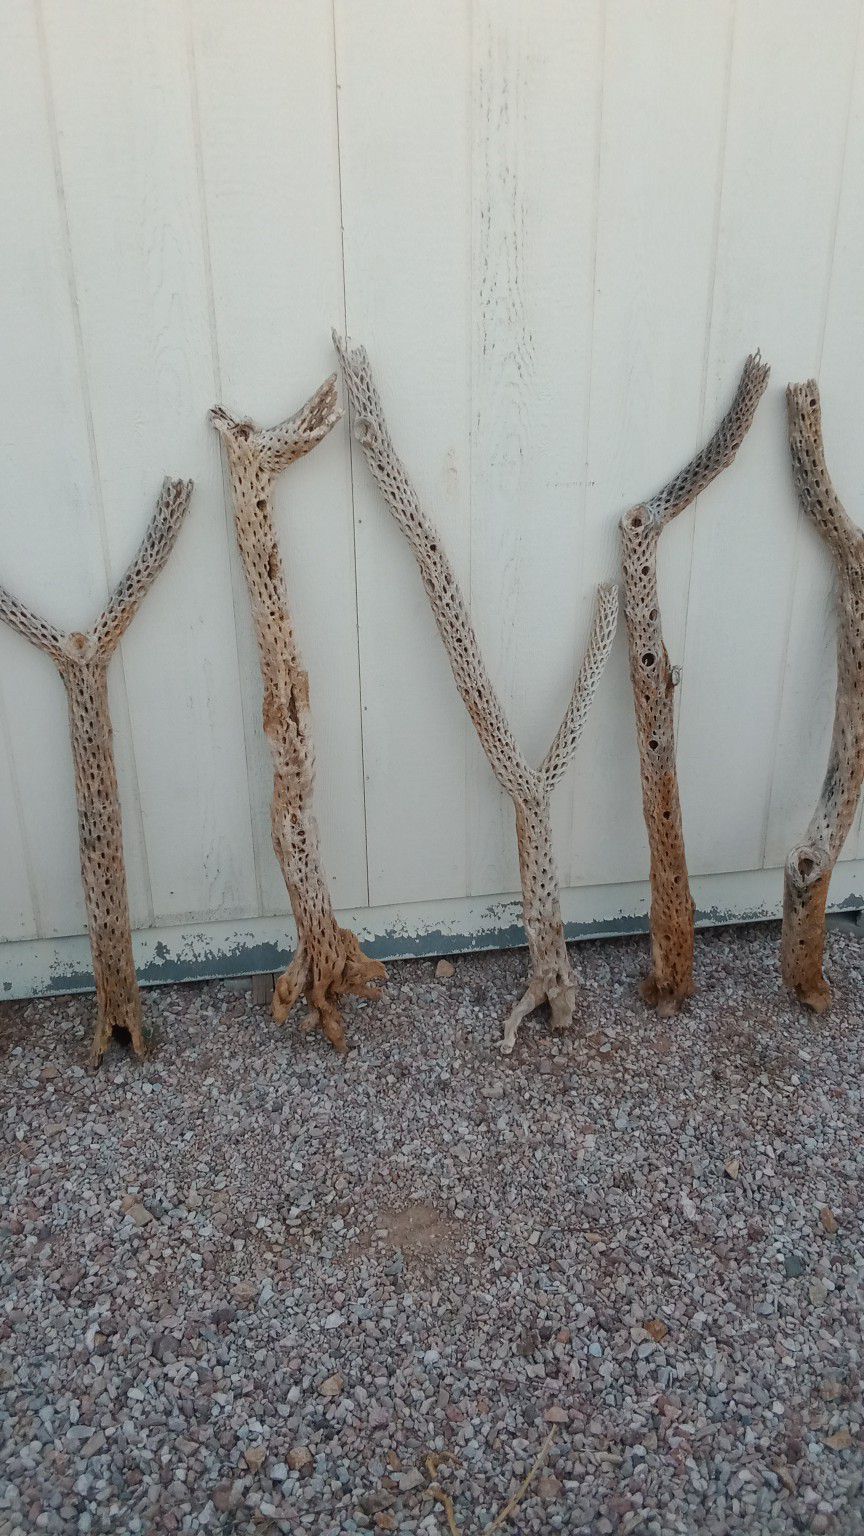 Cholla Cactus Skeletons For Your Crafts Or Art Project